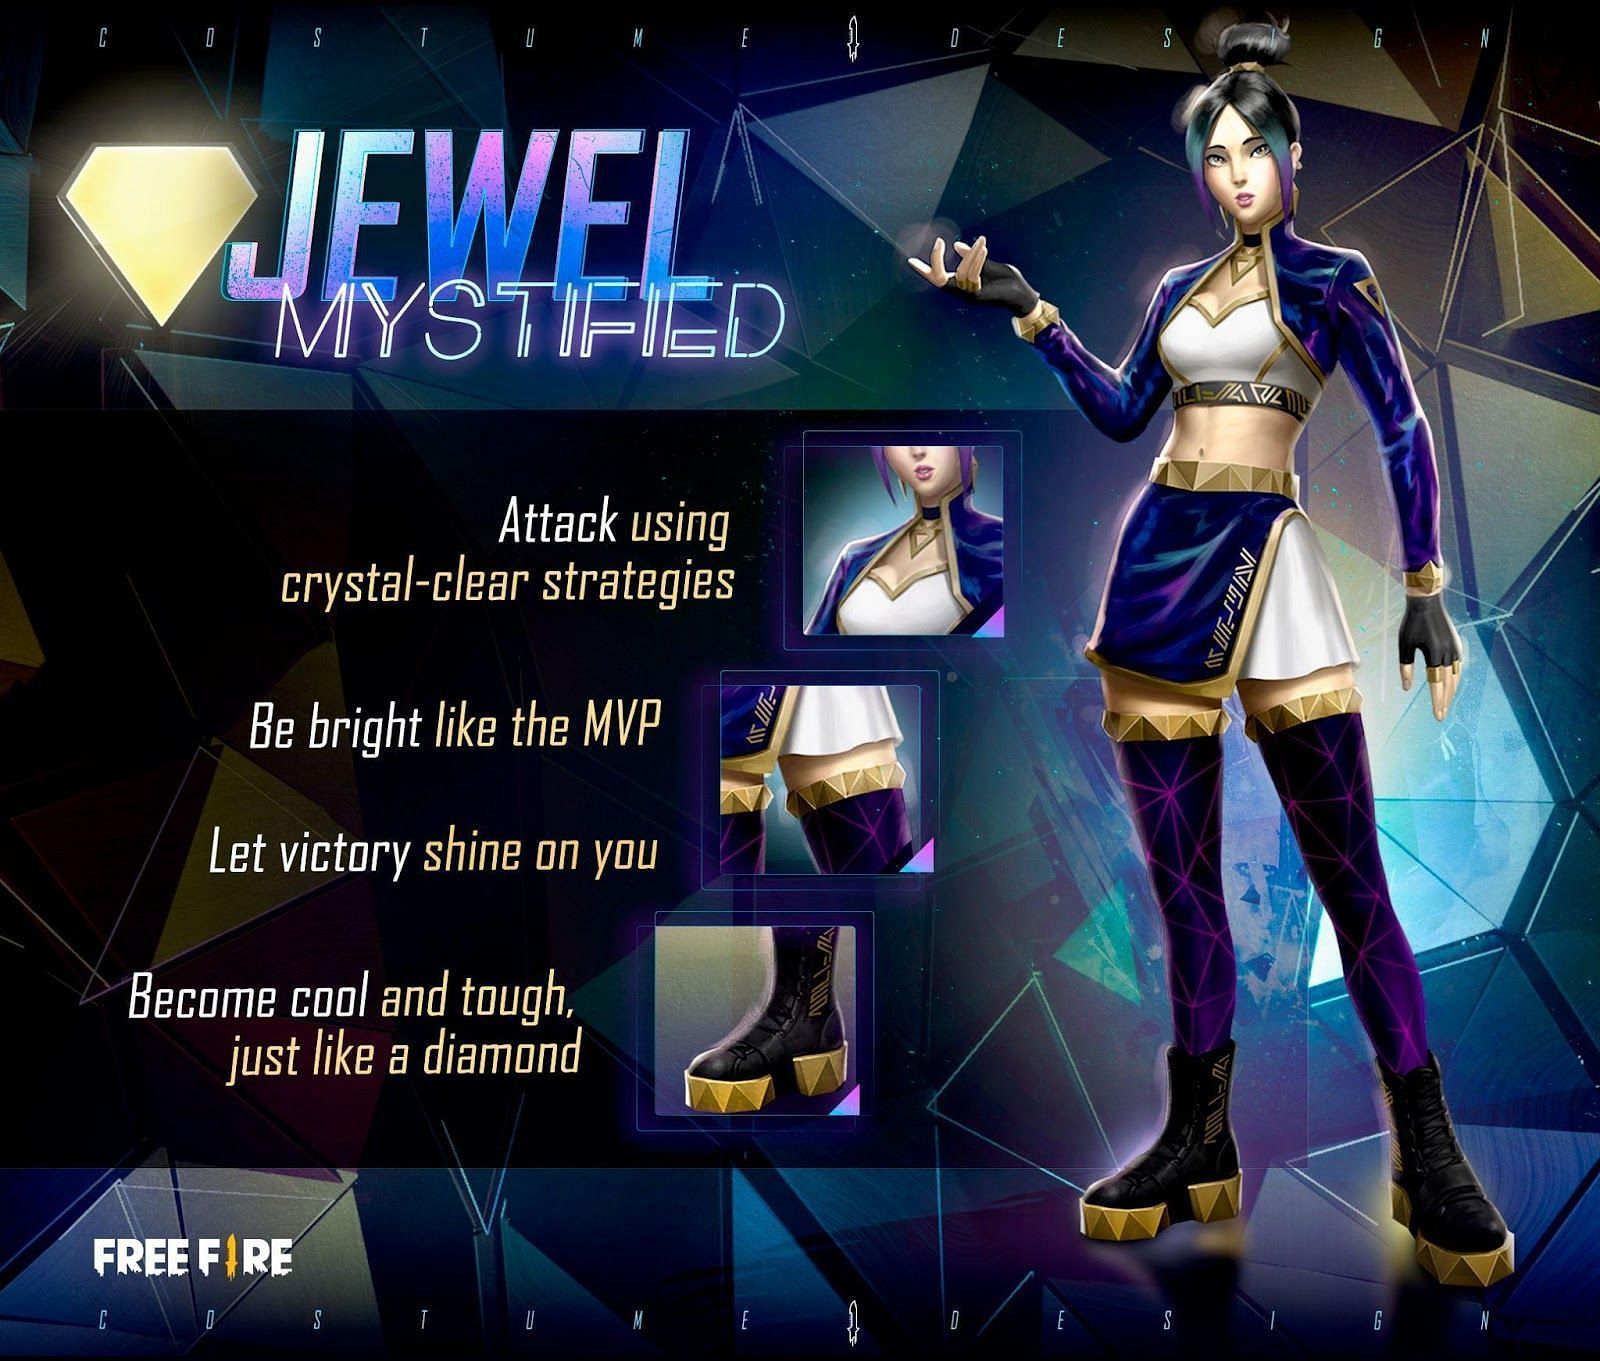 The grand prize of the Jewel Mystified bundle, up for grabs until 20 February